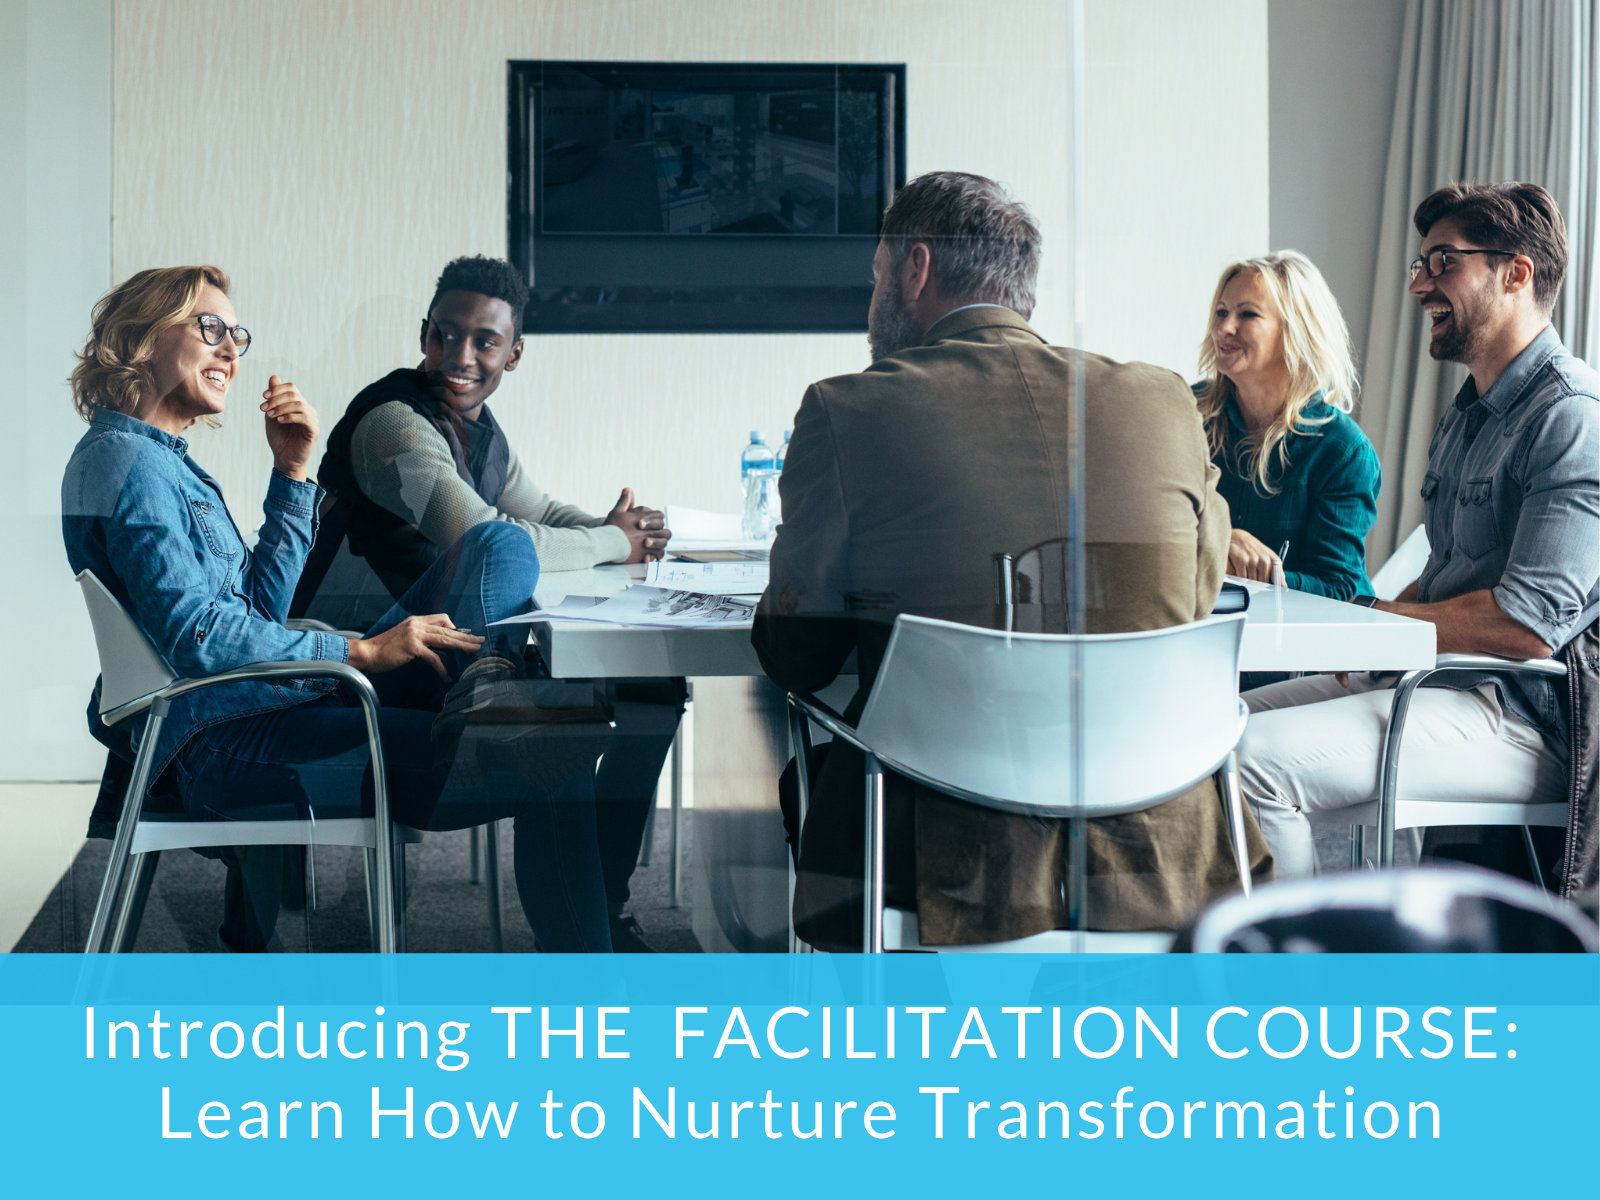 Introducing THE FACILITATION COURSE: 
Learn How to Nurture Transformation